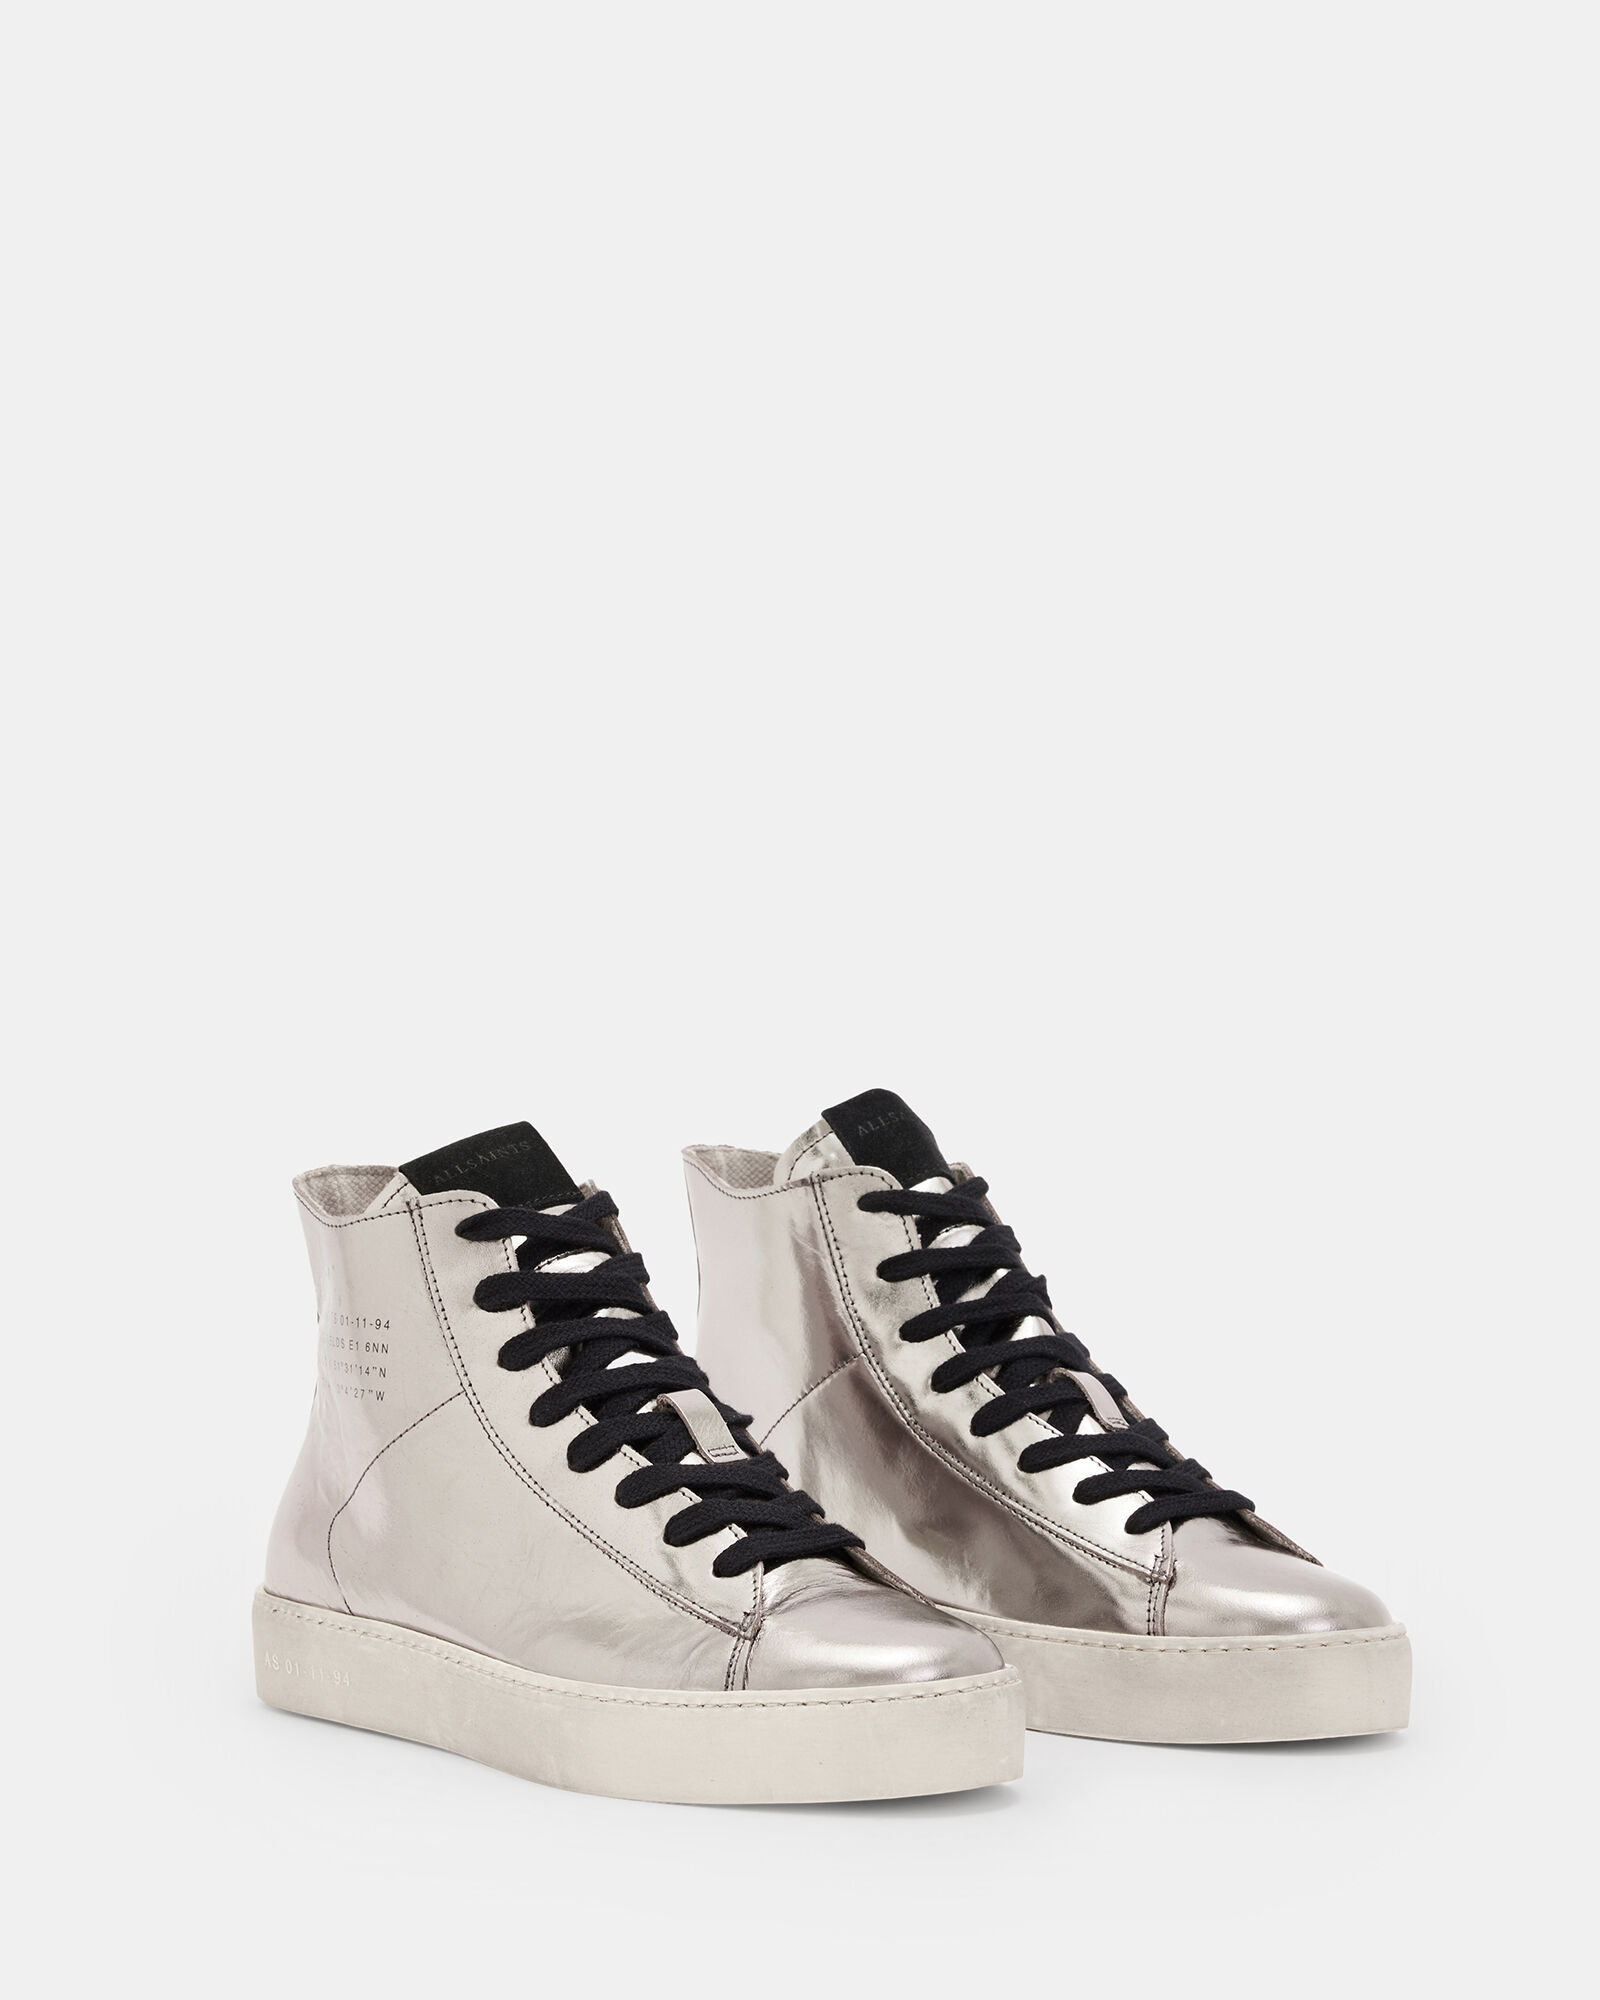 Tana Metallic Leather High Top Sneakers Silver | ALLSAINTS US